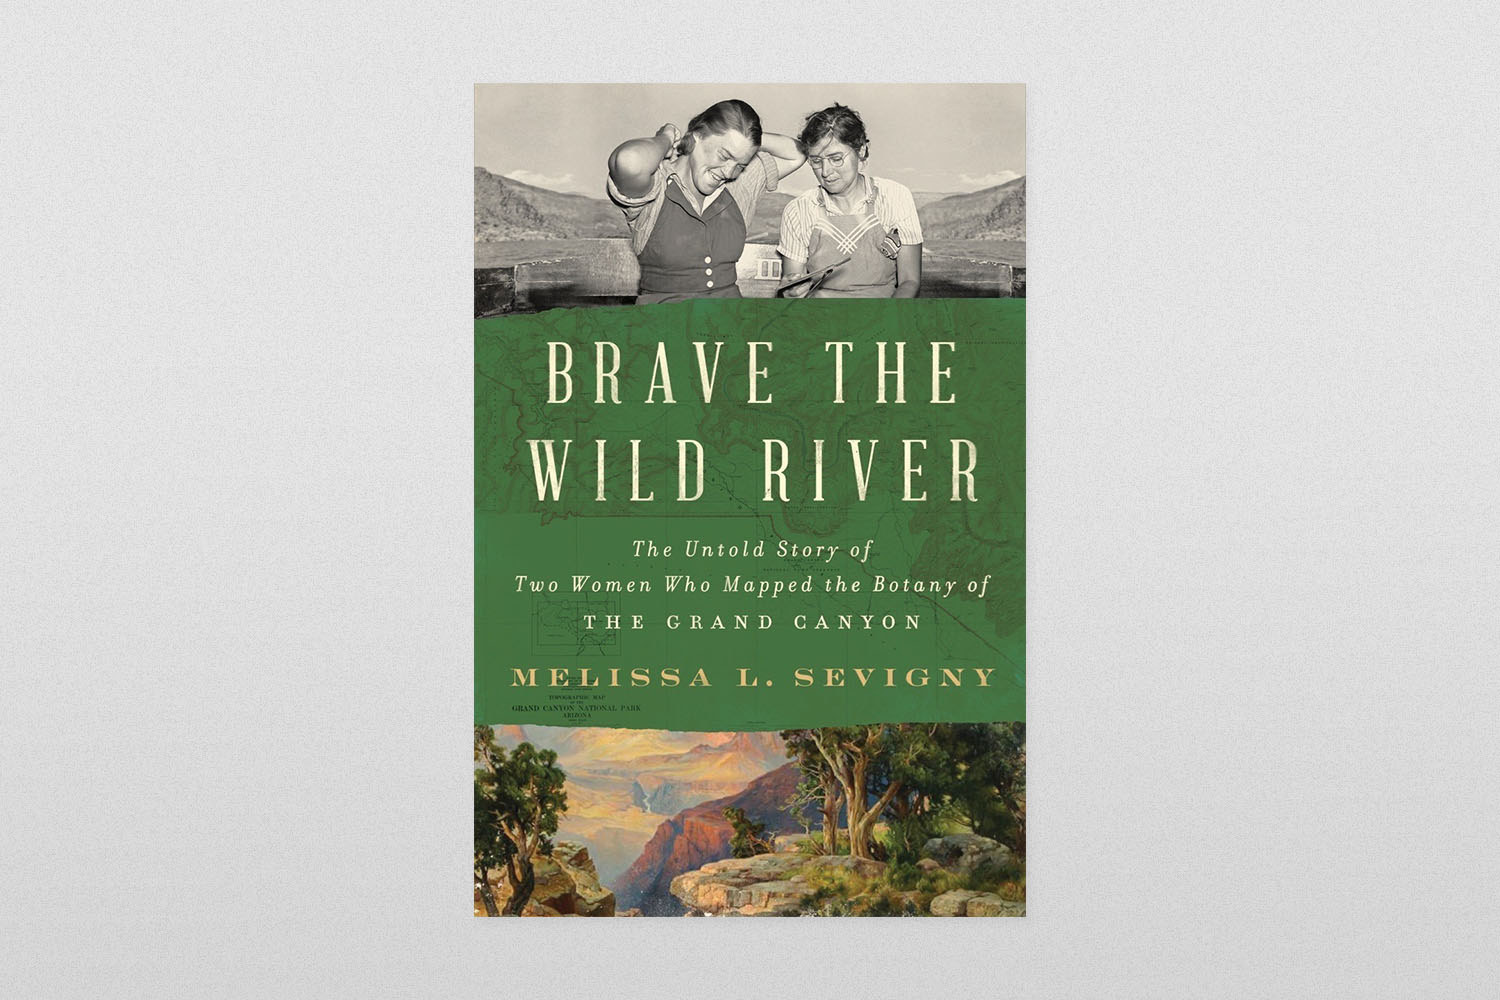 Brave the Wild River- The Untold Story of Two Women Who Mapped the Botany of the Grand Canyon by Melissa L. Sevigny